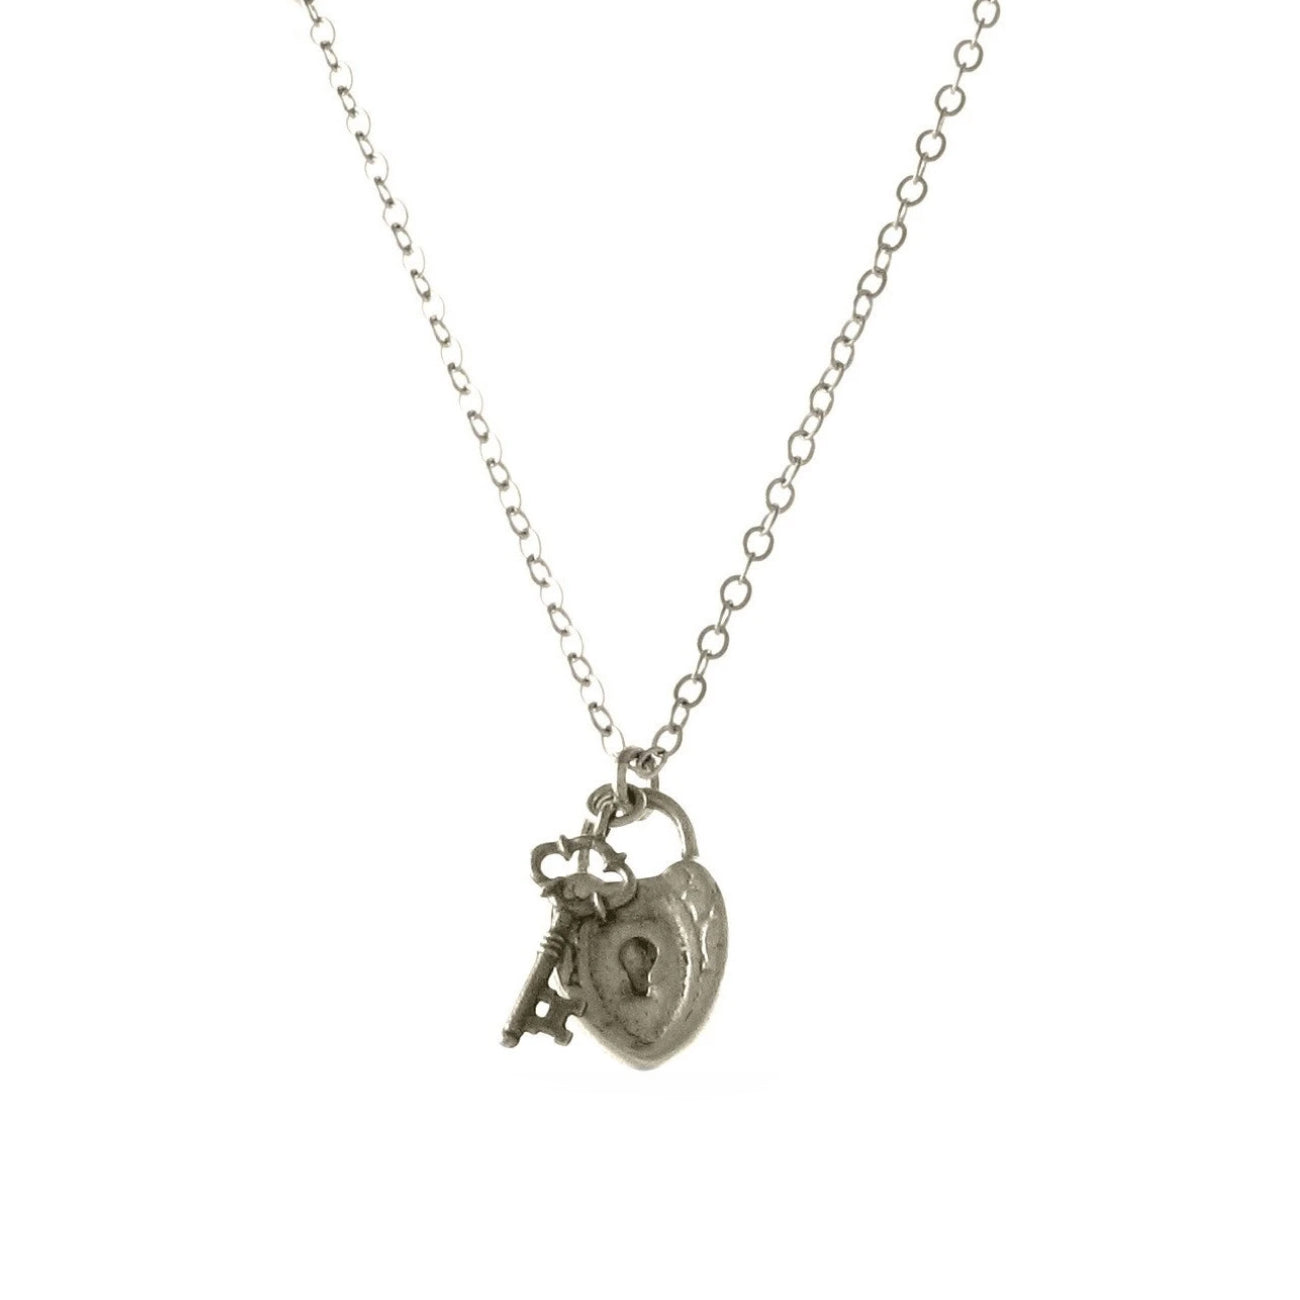 Small Padlock Pendant Silver, Sterling Silver & Gold Vermeil Jewellery